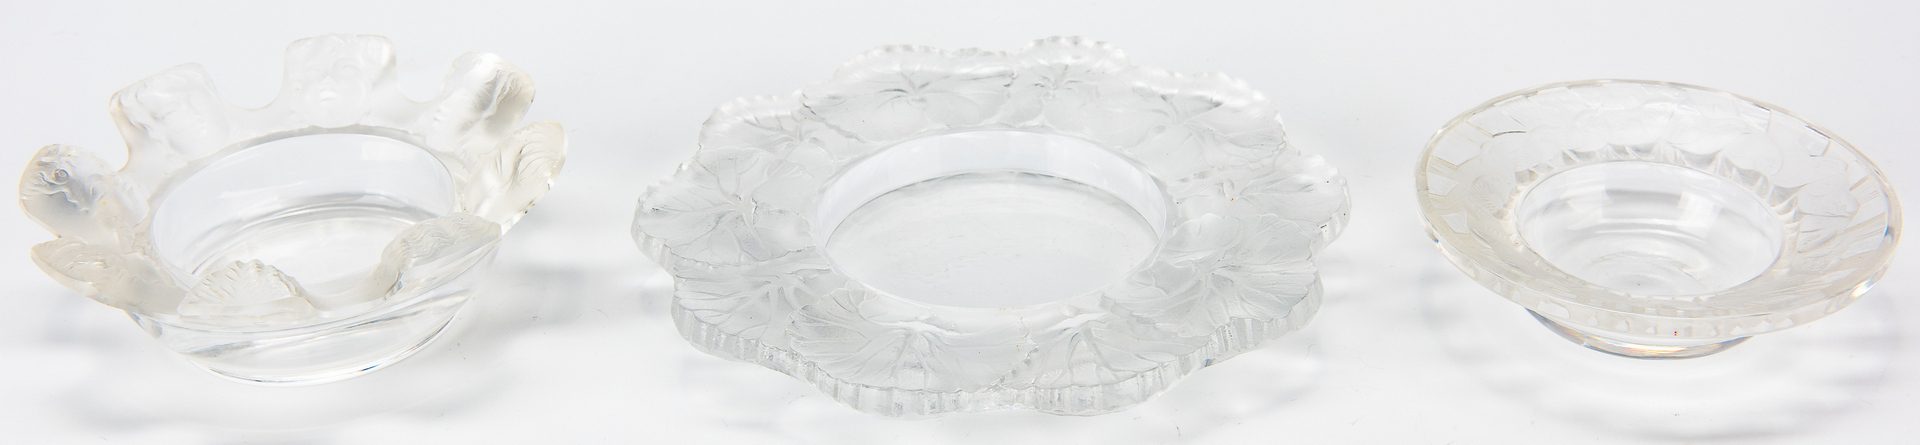 Lot 137: 9 Assorted Lalique Novelty Crystal Items